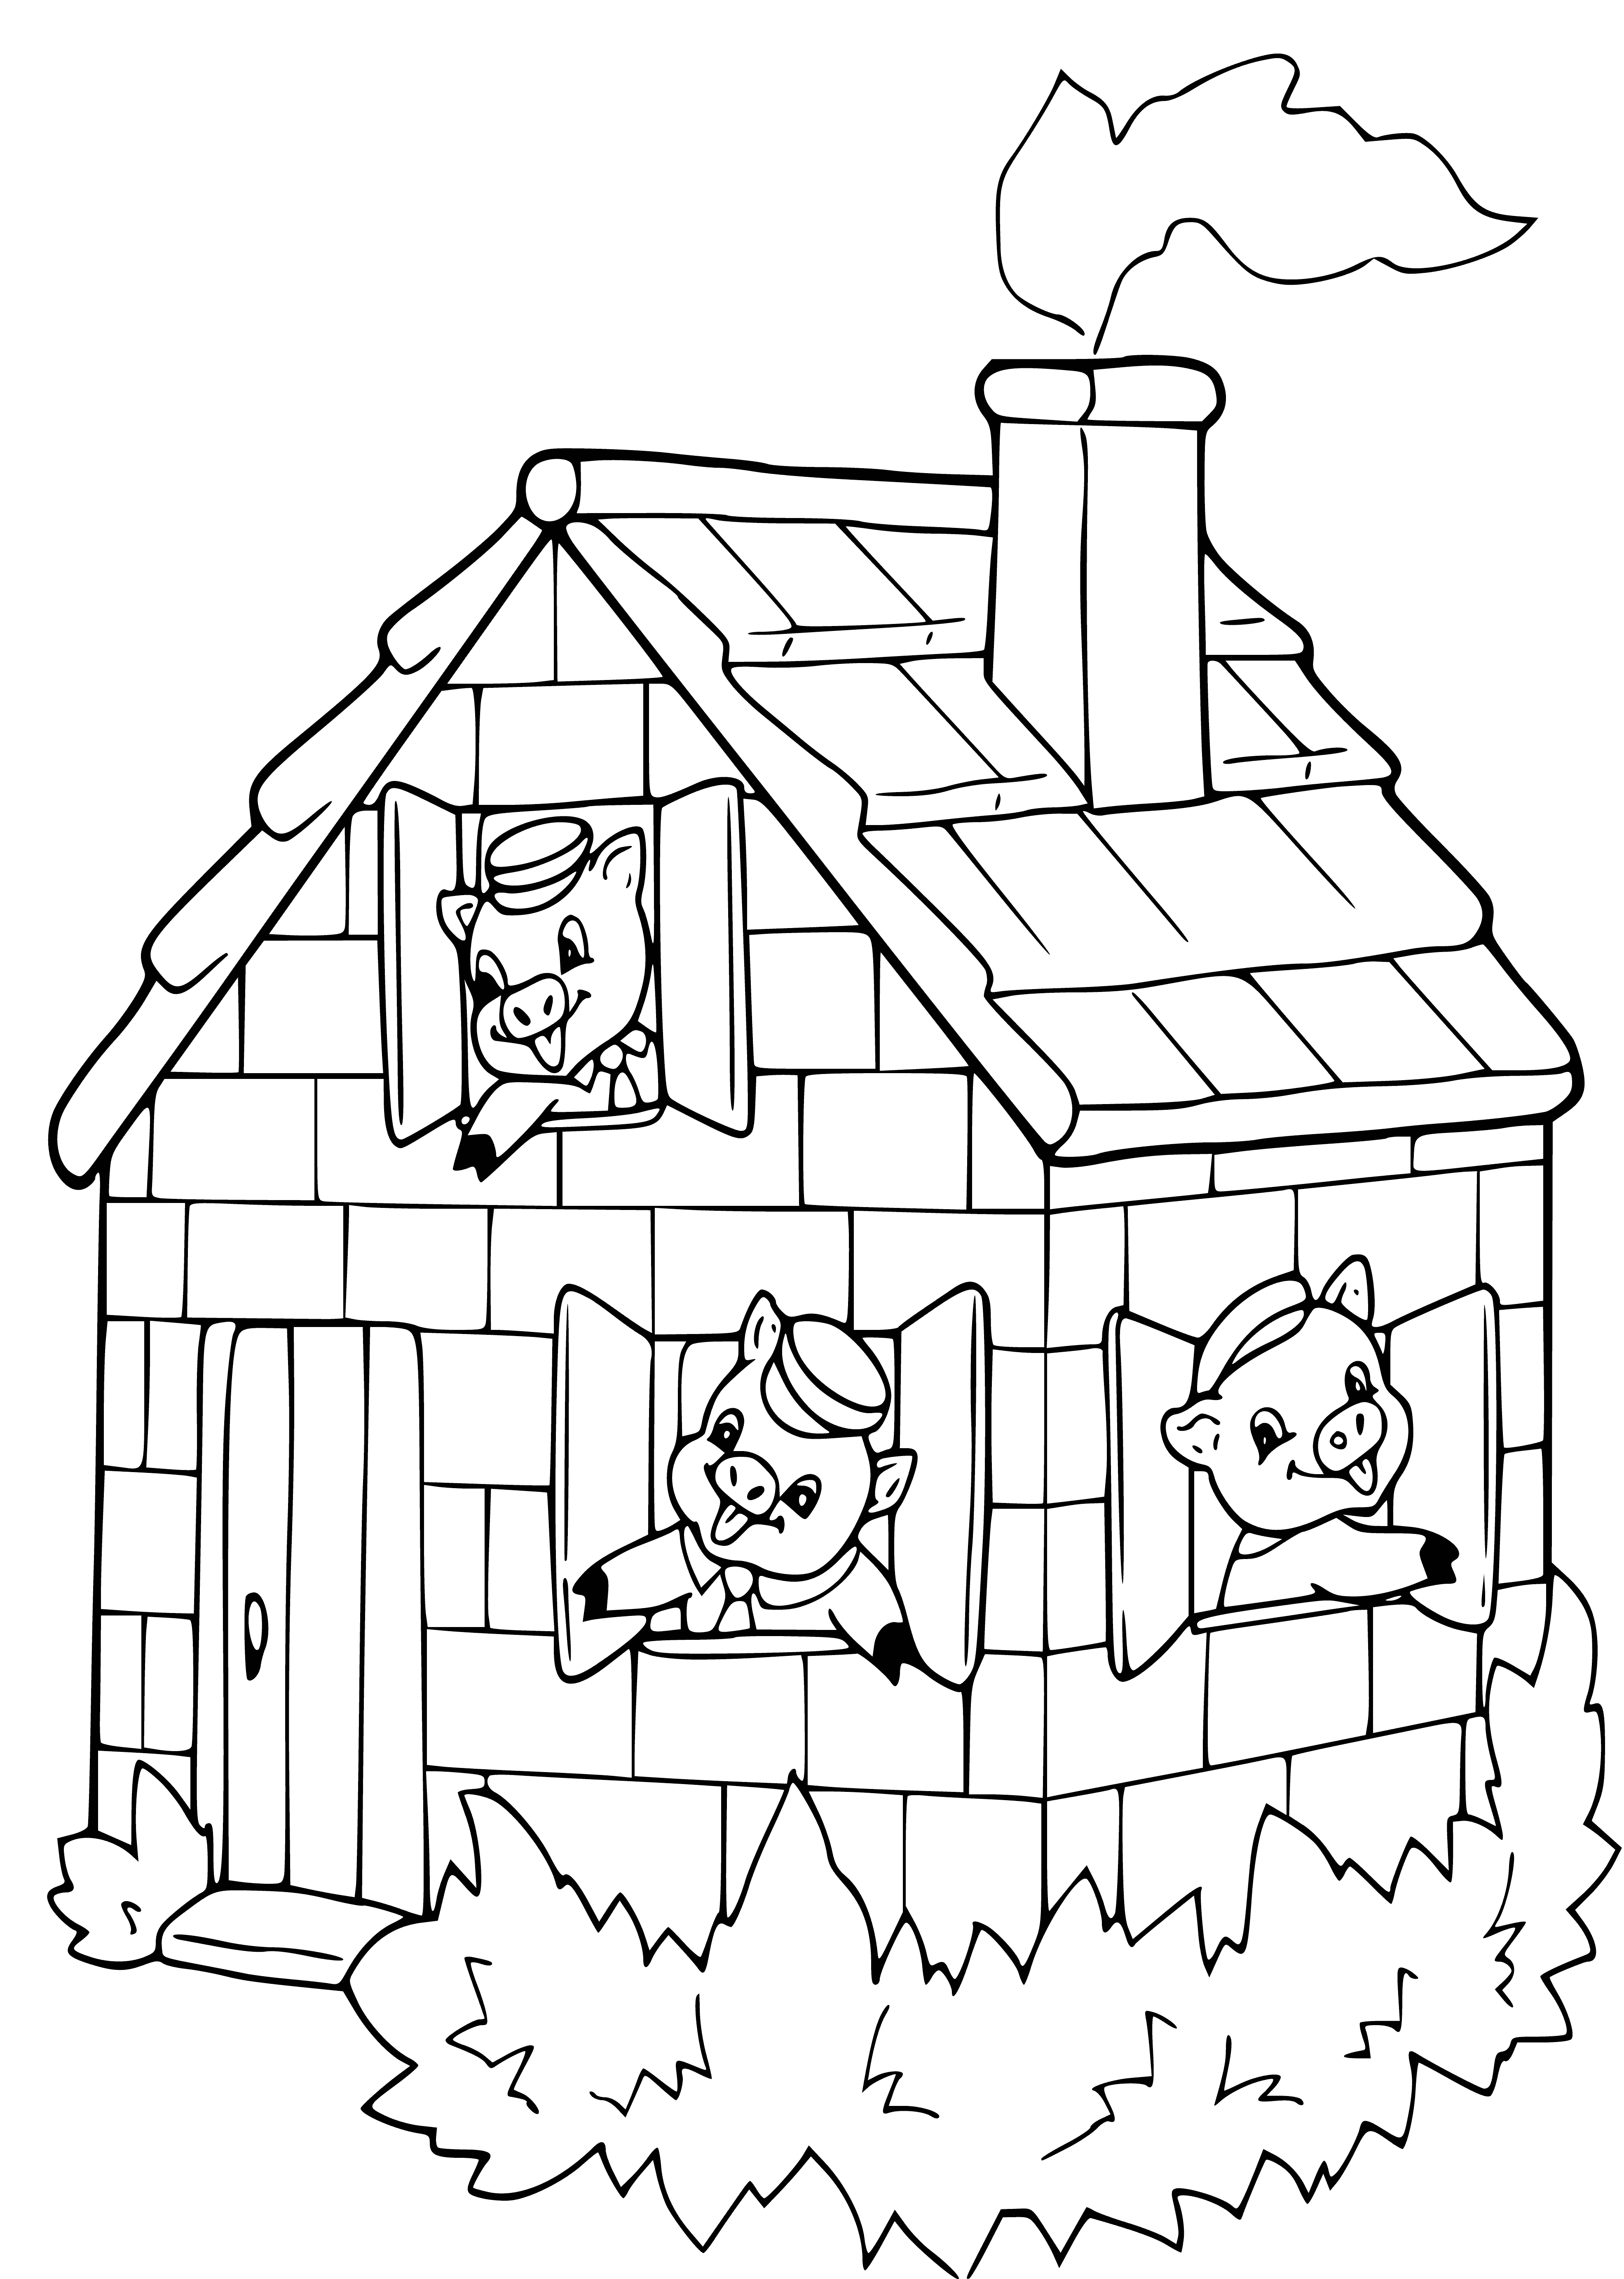 Three little pigs built a big house coloring page